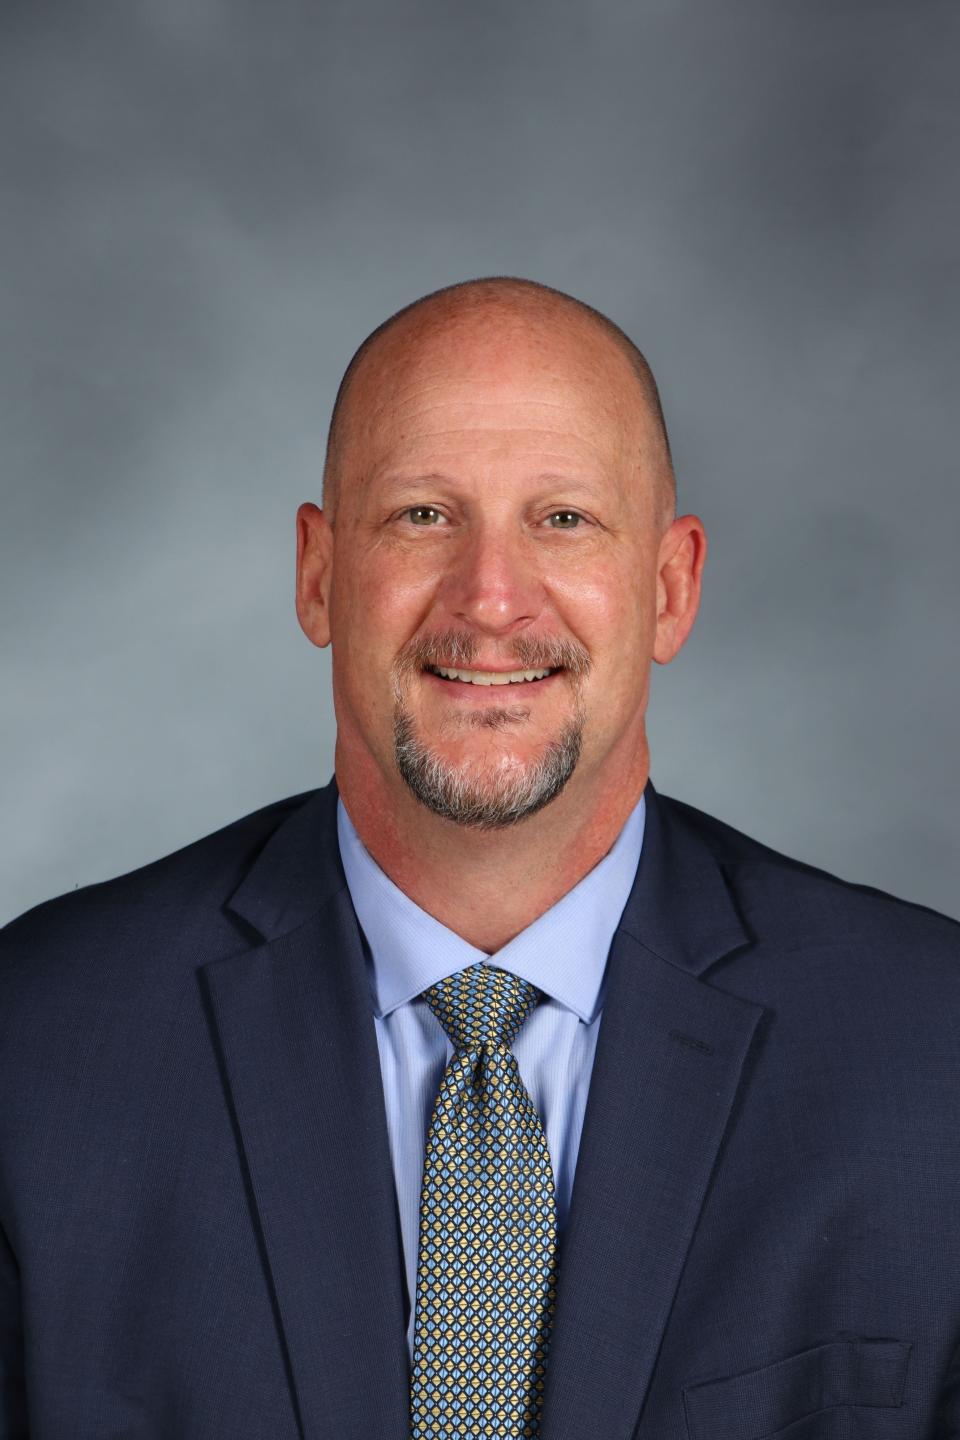 Olentangy High School Principal Robert Griffiths has resigned, the school district said on Dec. 1, 2023. Griffiths was placed on administrative leave in October after a schools employee filed a sexual harassment/discrimination complaint against him,